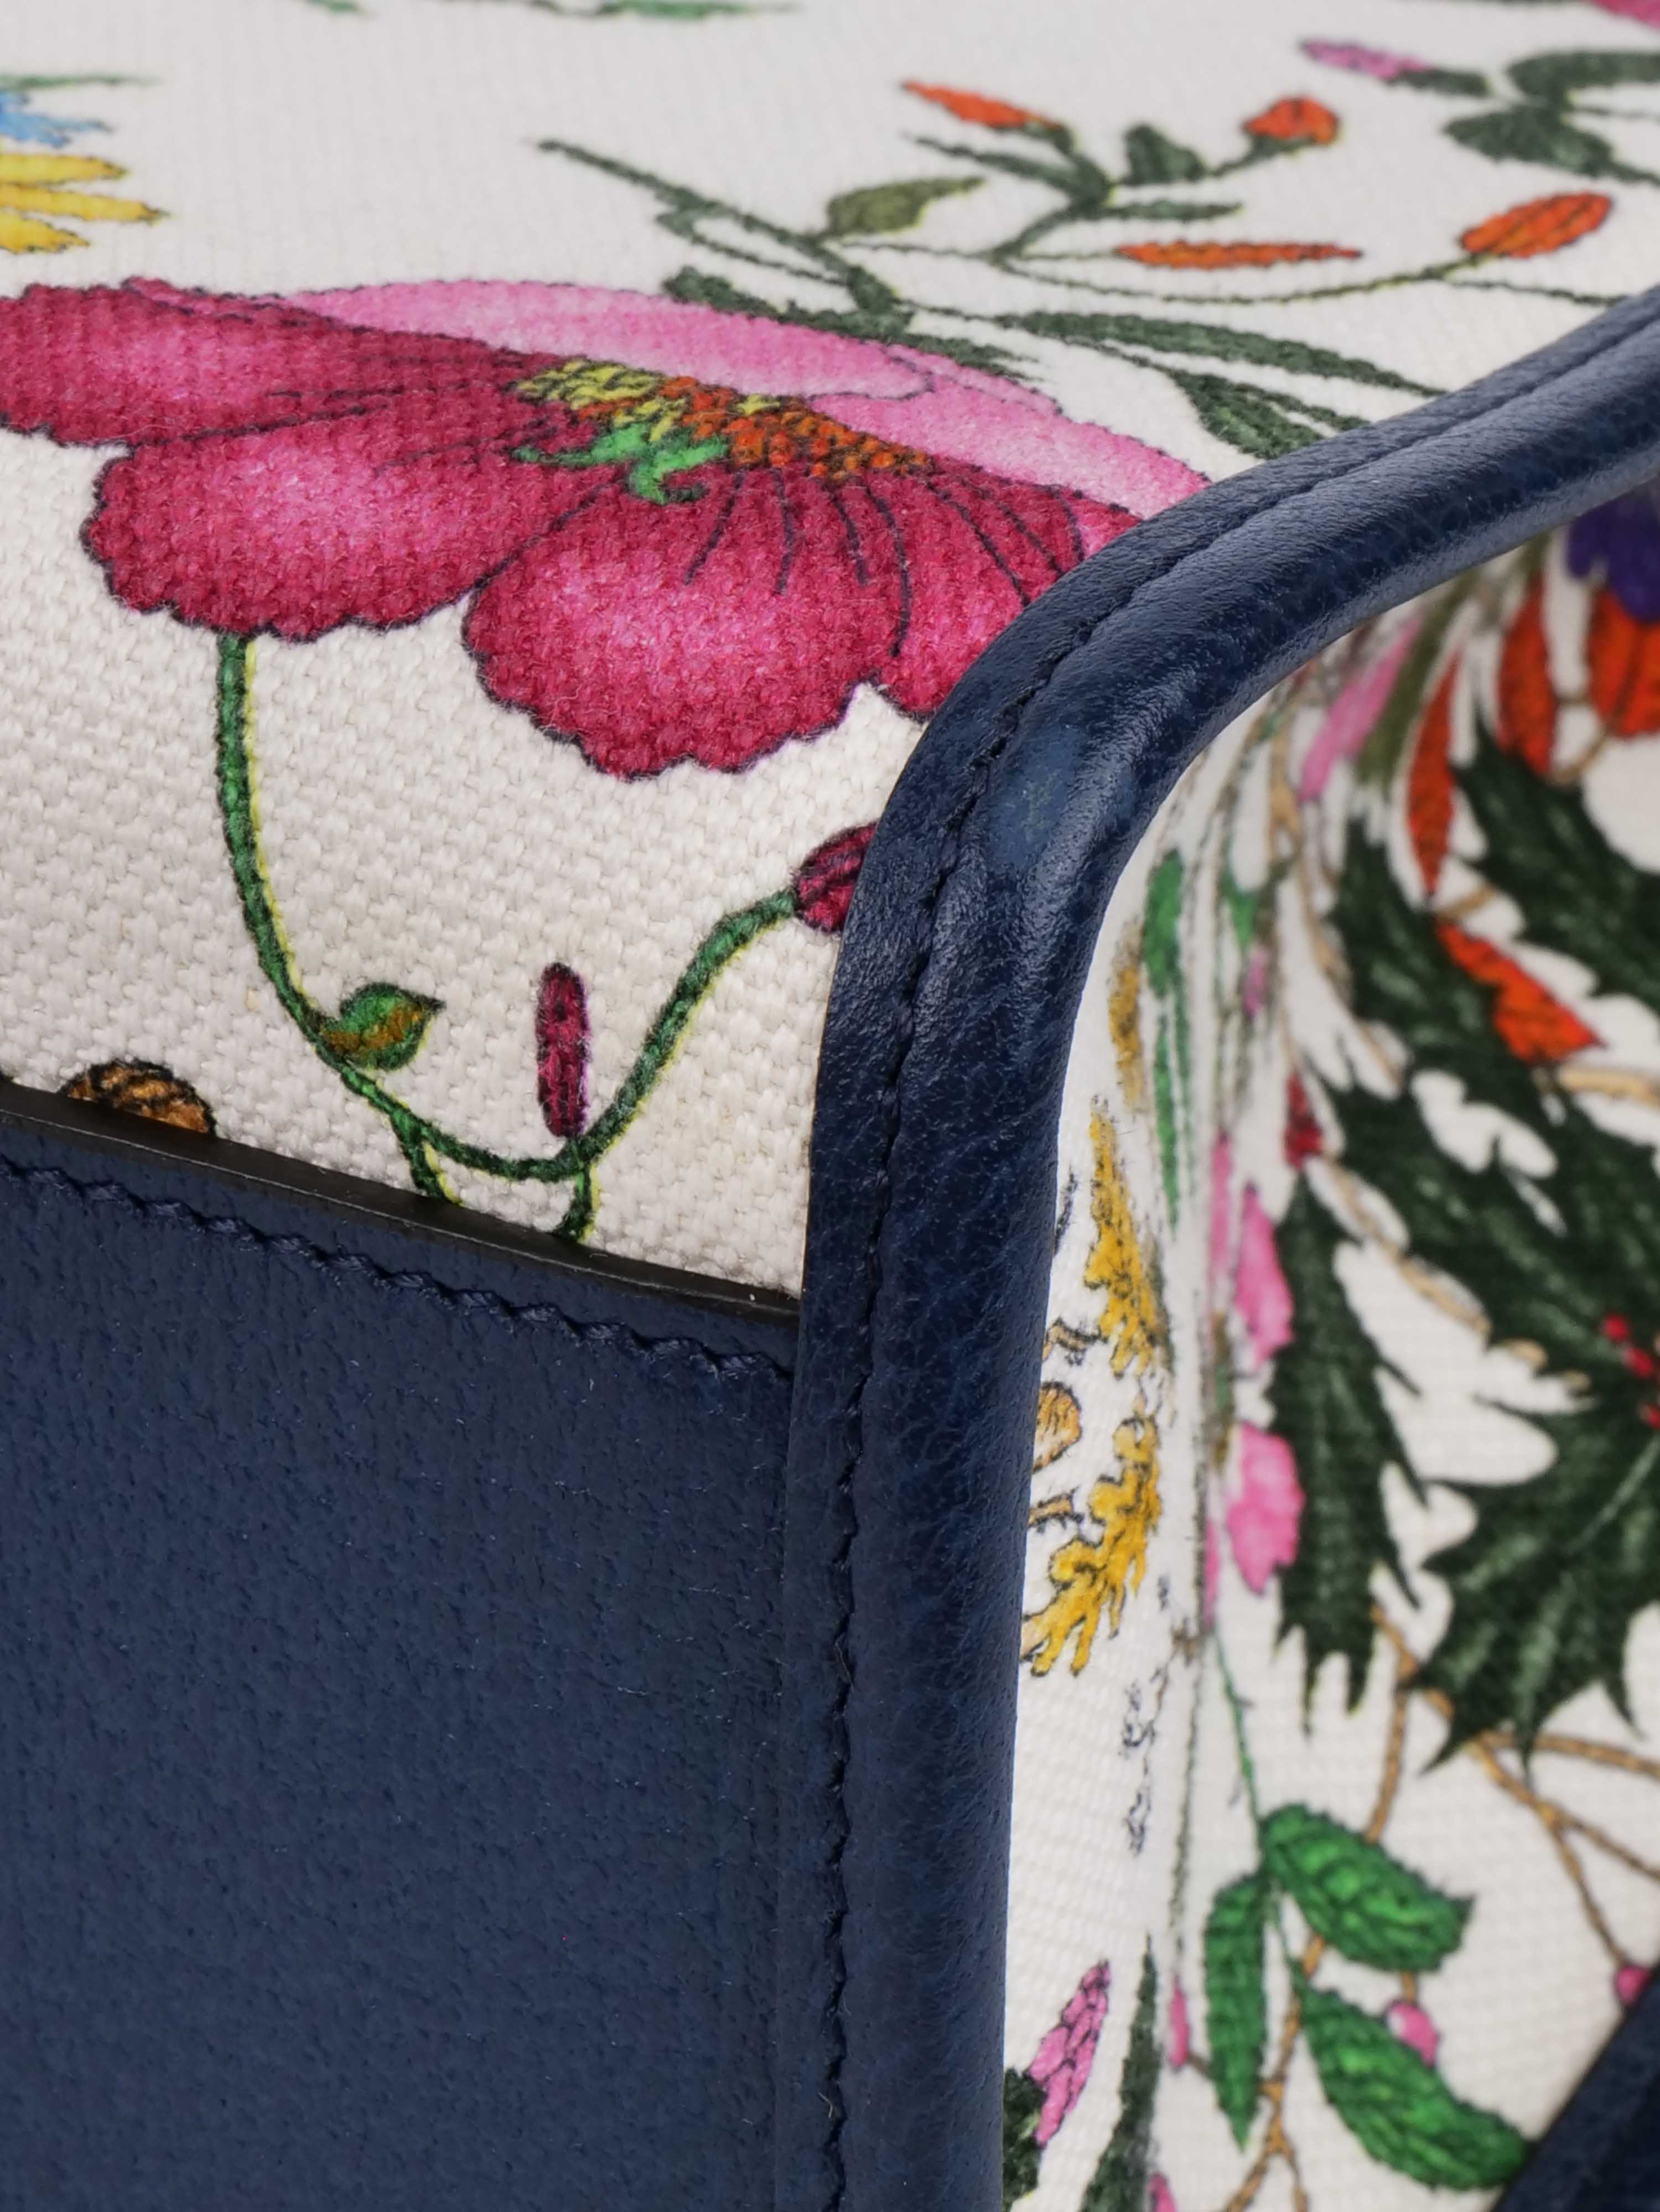 Gucci Floral Canvas Tote with Blue Leather Trim.